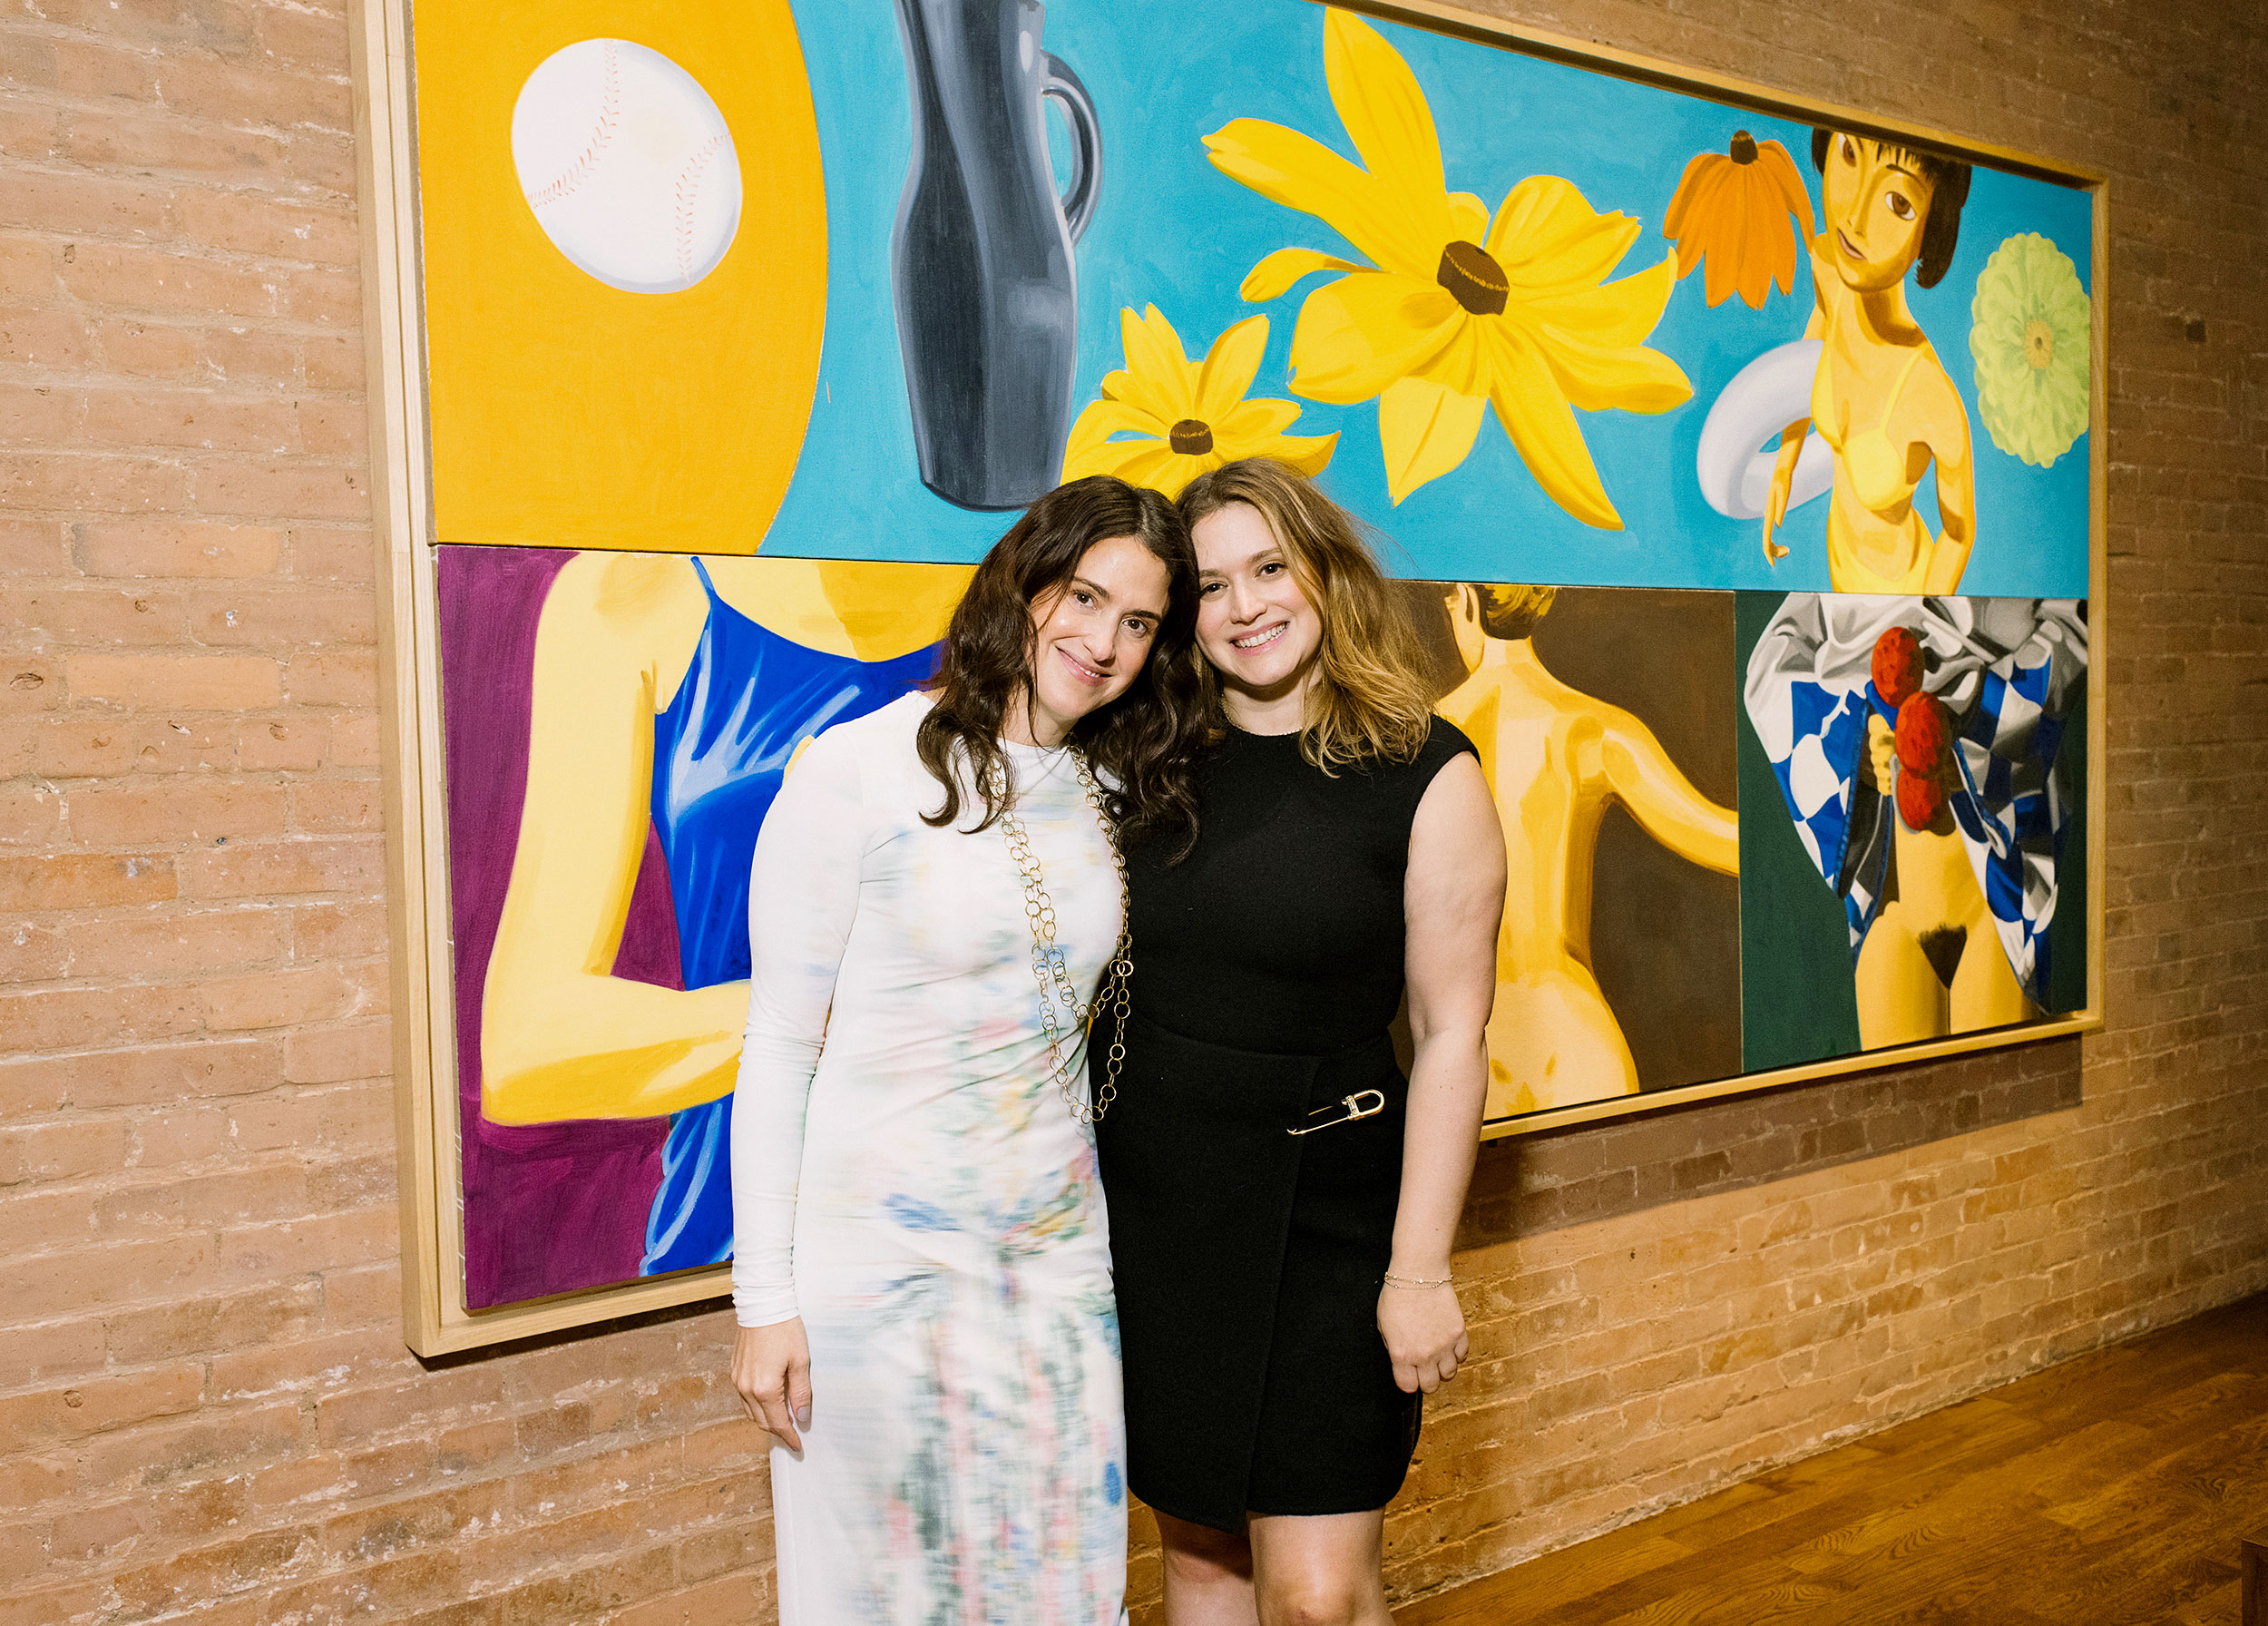 Sisters Roselyn and Alexandra Mathews Shed Light on Their Family’s Illustrious Art Collection